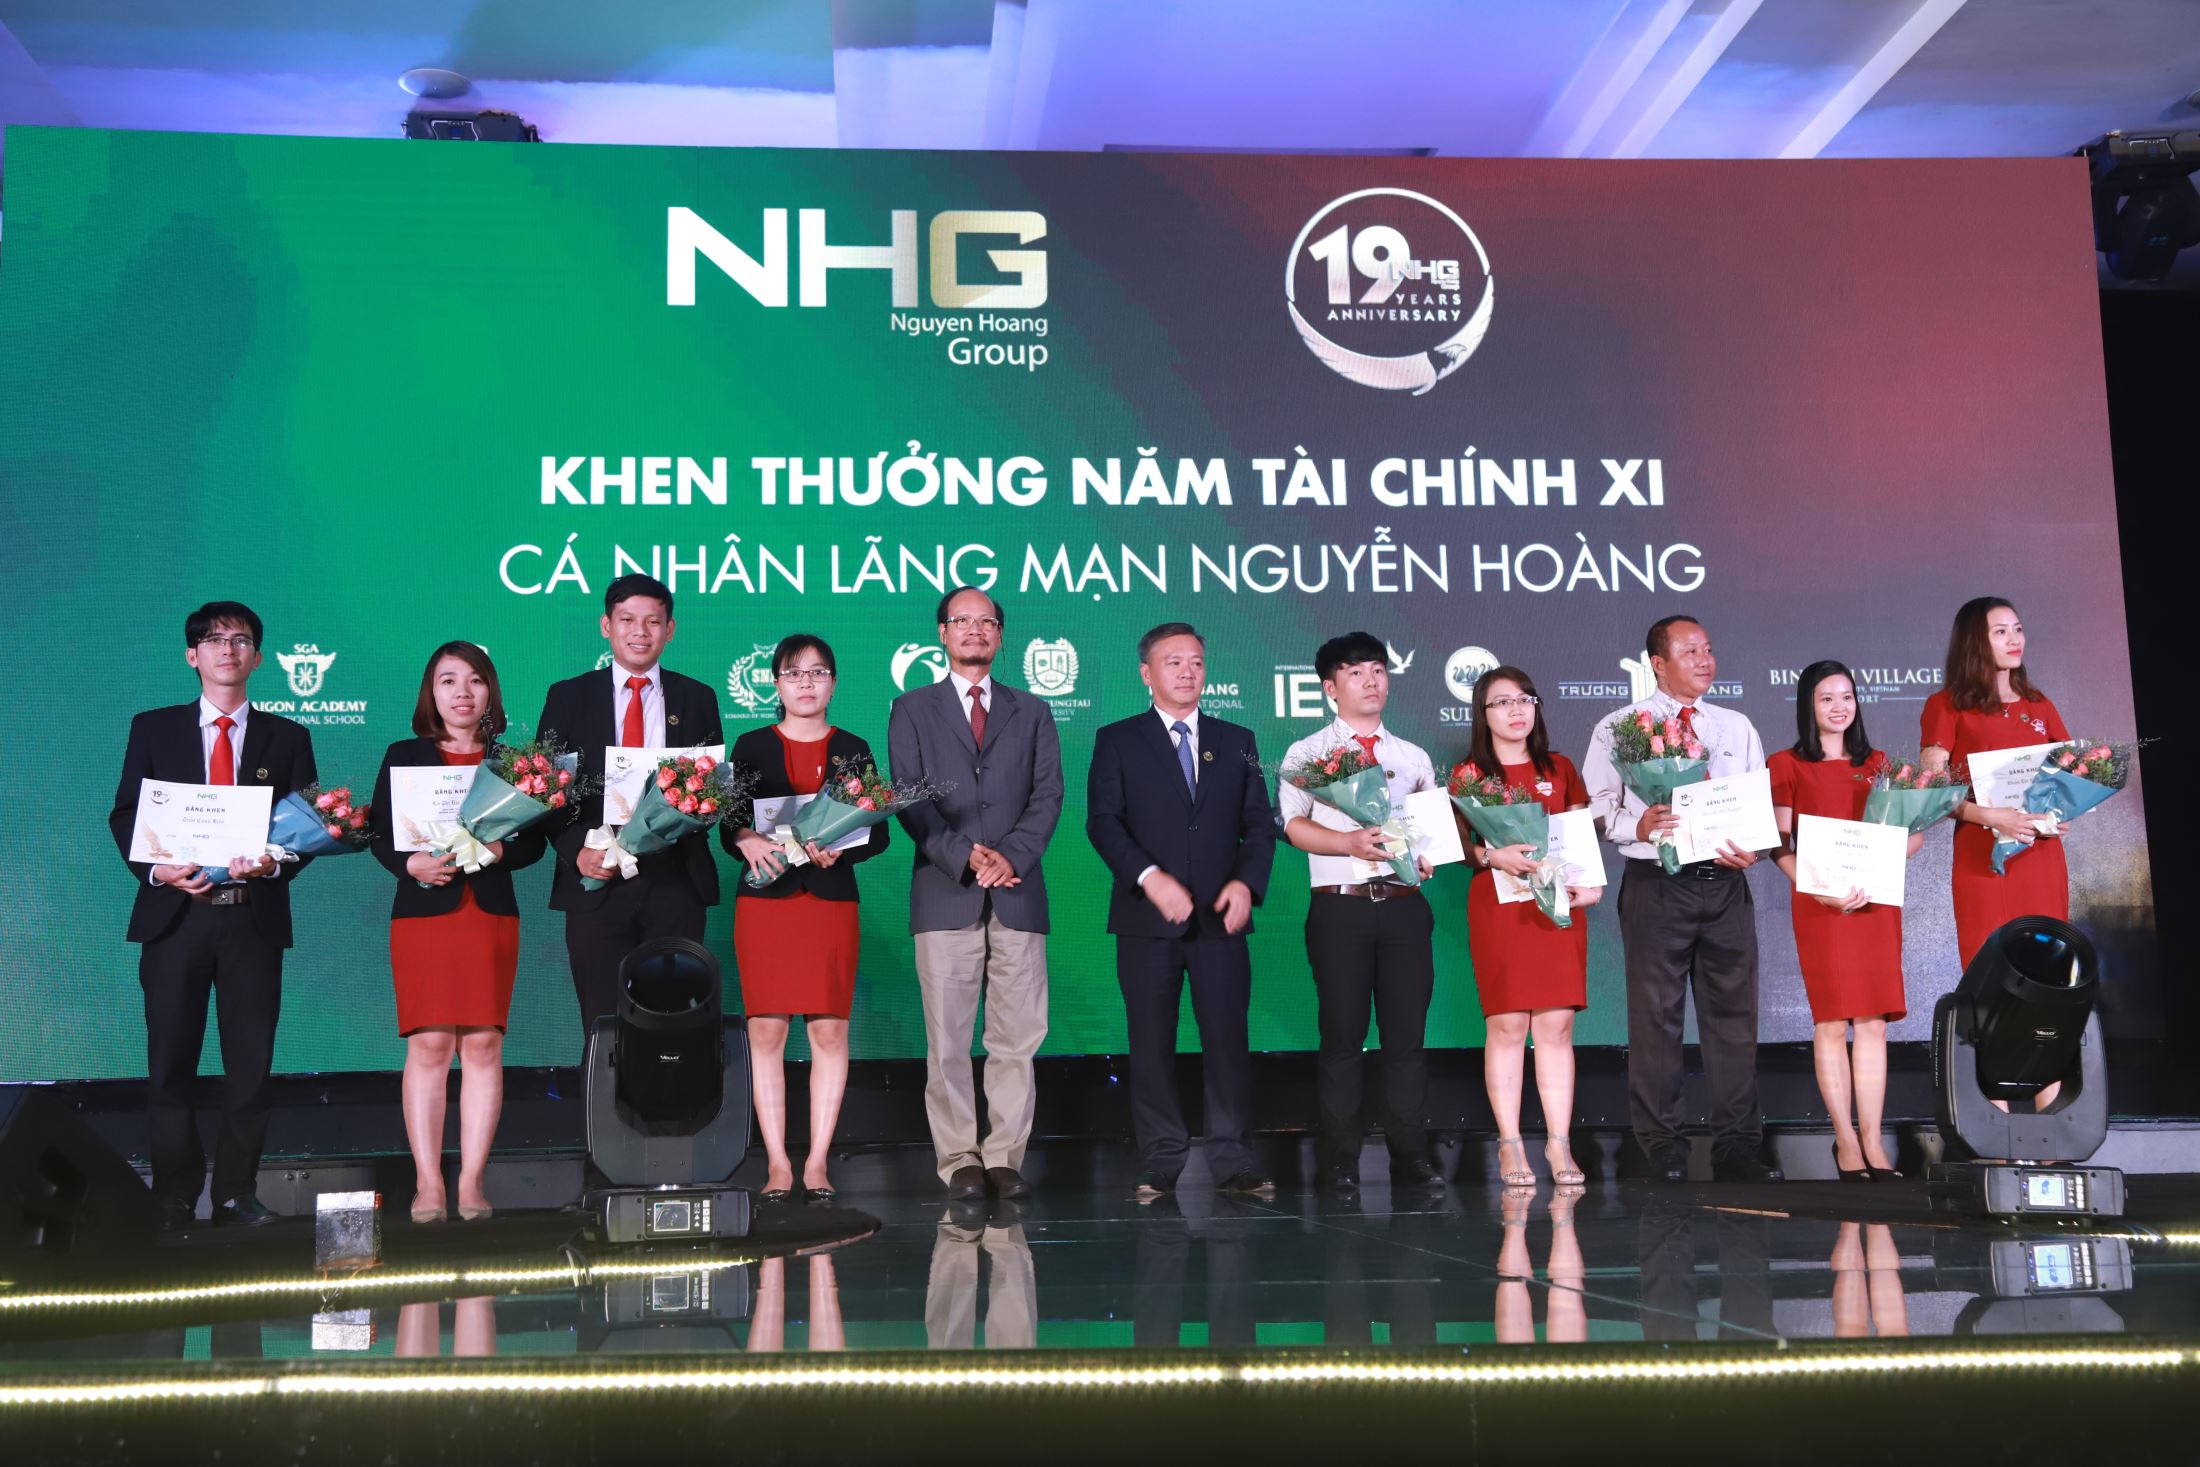 Awarding “Romance” prize for individuals having many contributions in financial year XI.